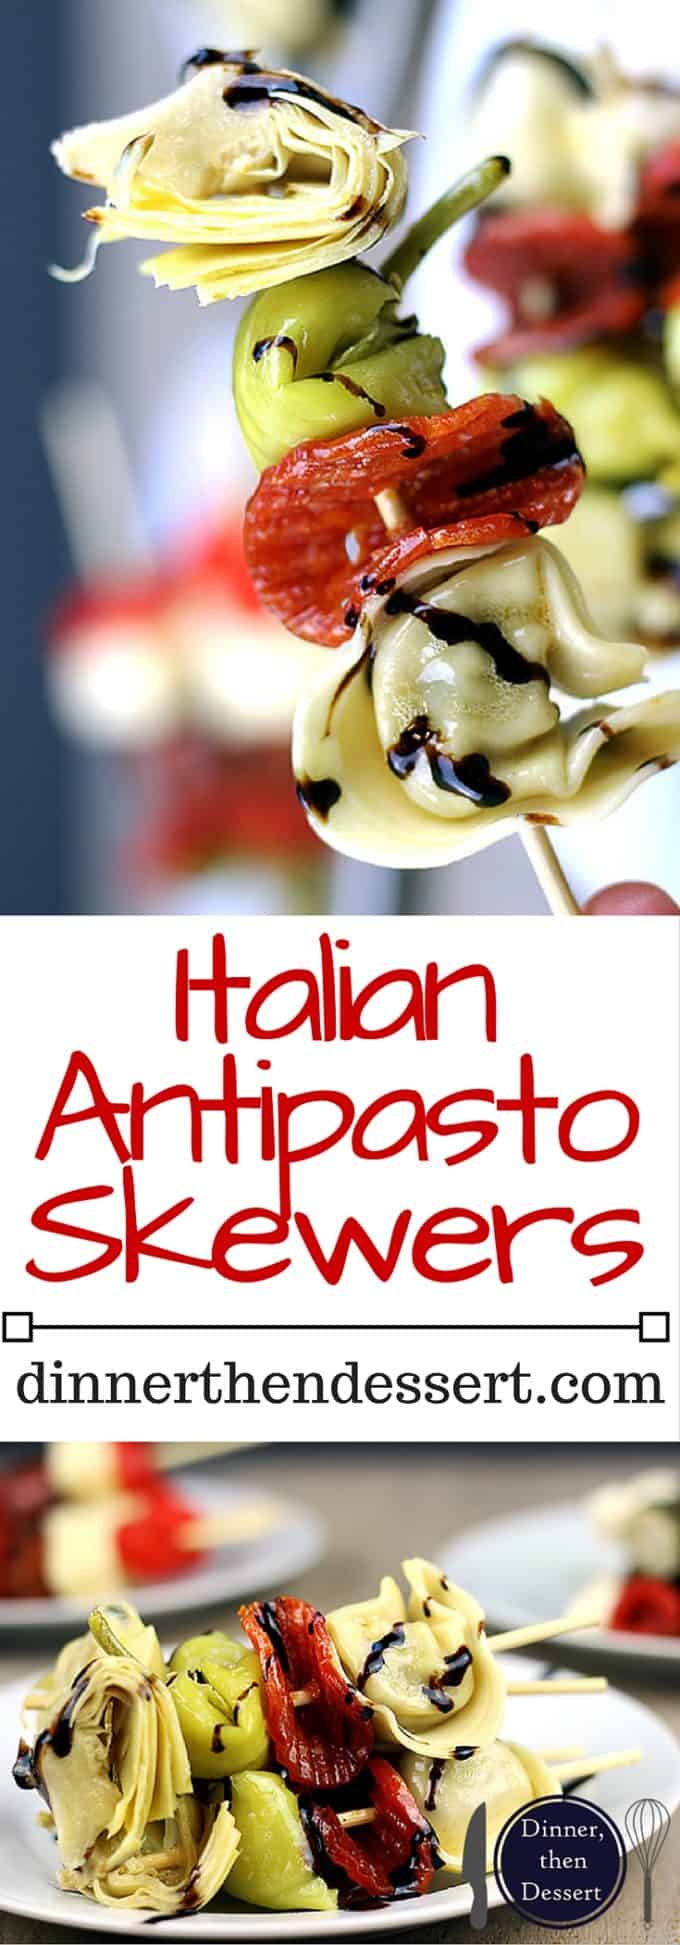 Italian Antipasto Skewers: The spice of the pepperoni, the sweet vinegar of the balsamic glaze, the tender tortellini filled with ricotta and spinach, the briney flavor of the pepperoncini and the artichoke heart. This skewer is going to be a solid contender for favorite bite at your next party! 